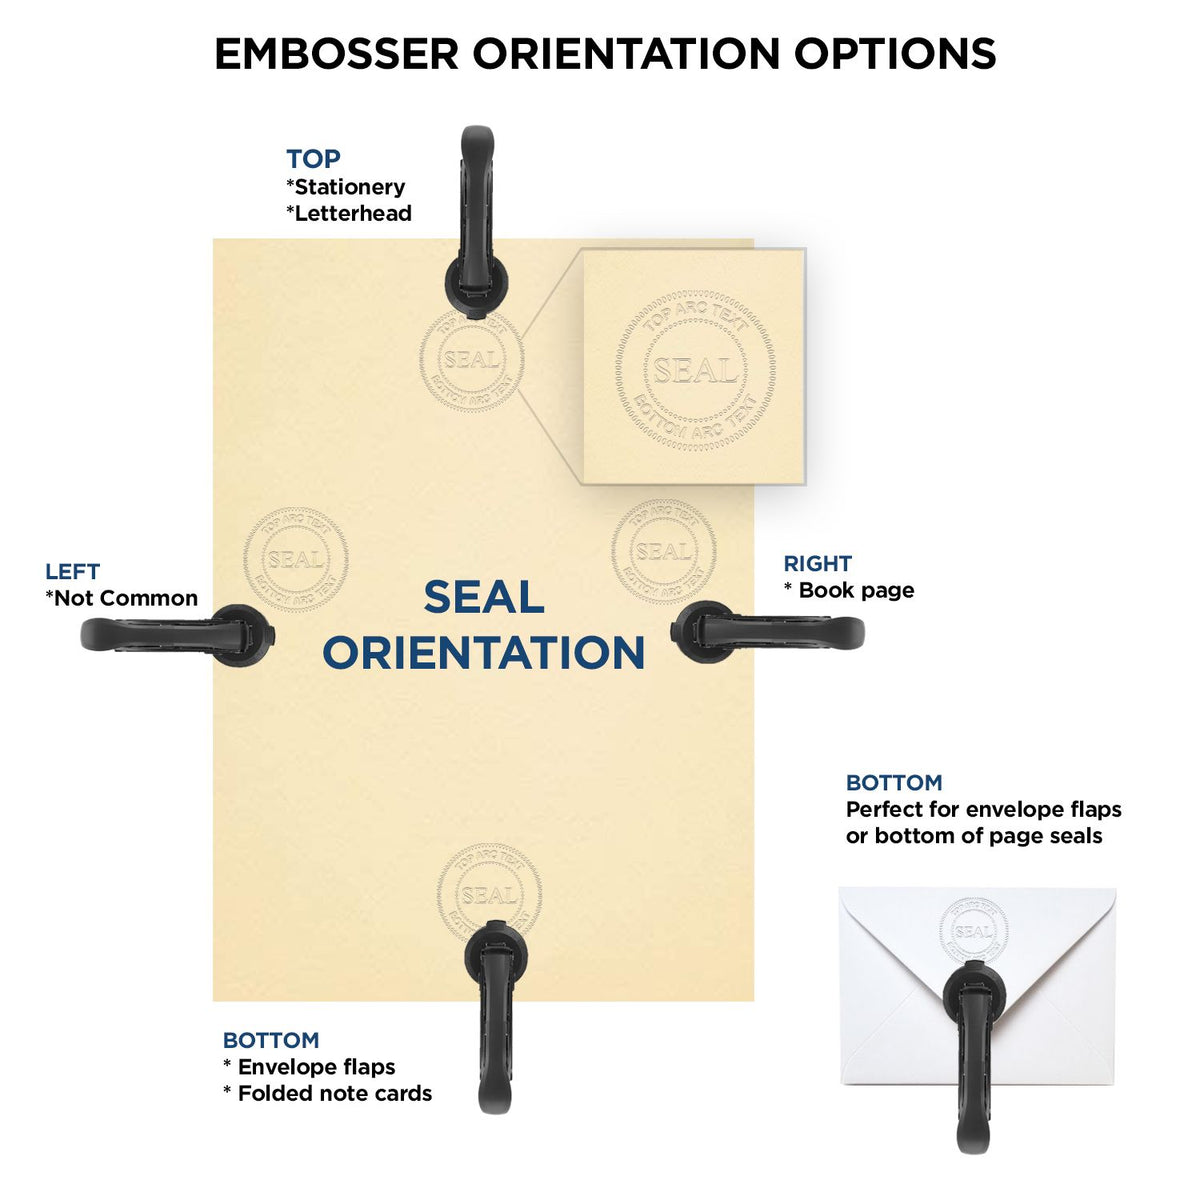 An infographic for the Connecticut Engineer Desk Seal showing embosser orientation, this is showing examples of a top, bottom, right and left insert.